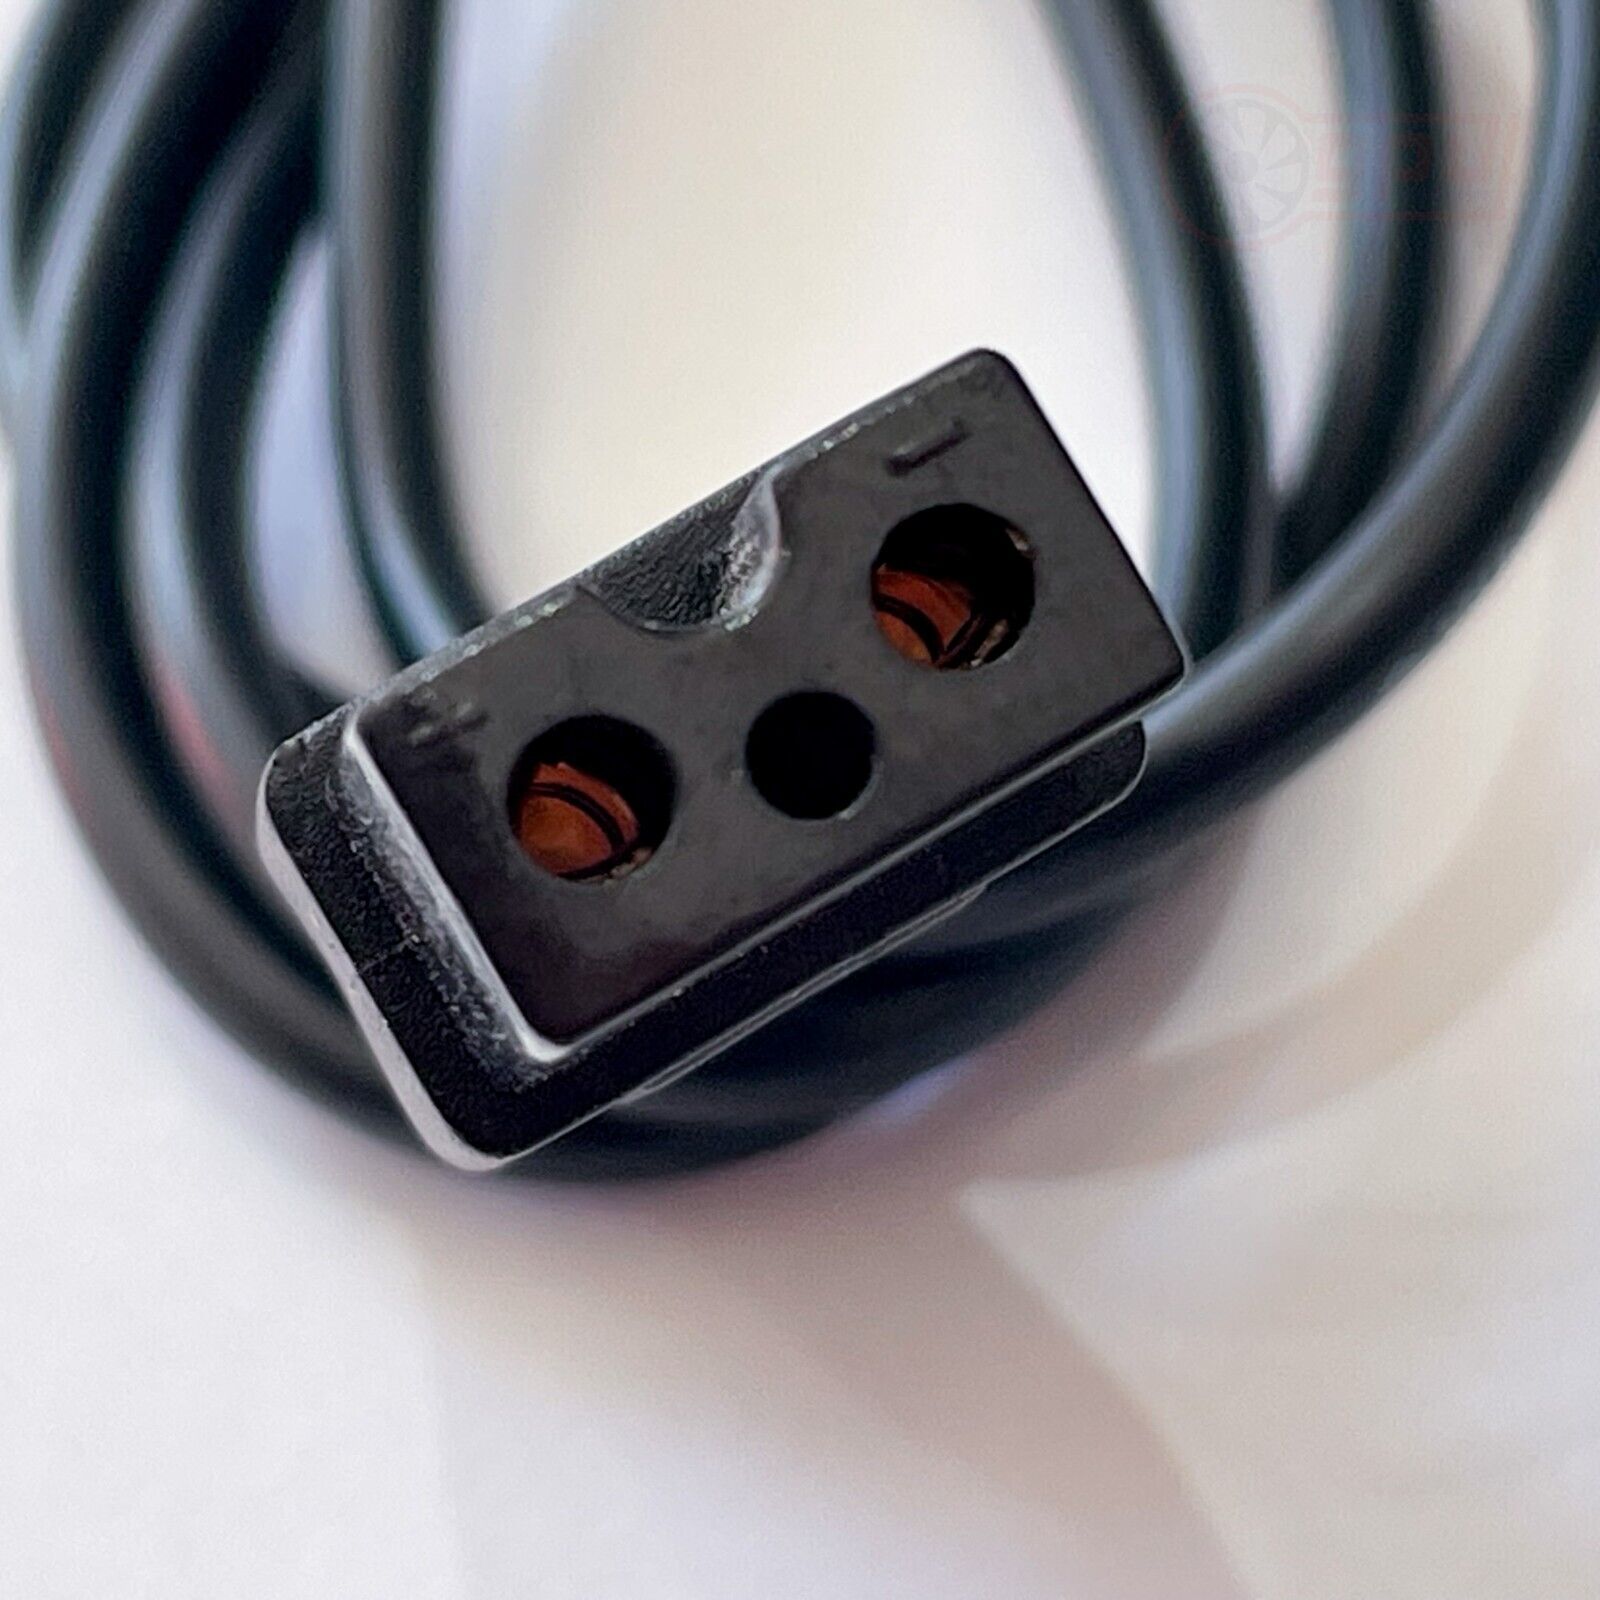 A black Pool Vacuum Charging USB Cable Replacement for Bestway / Lay-Z-Spa with two connectors on it.